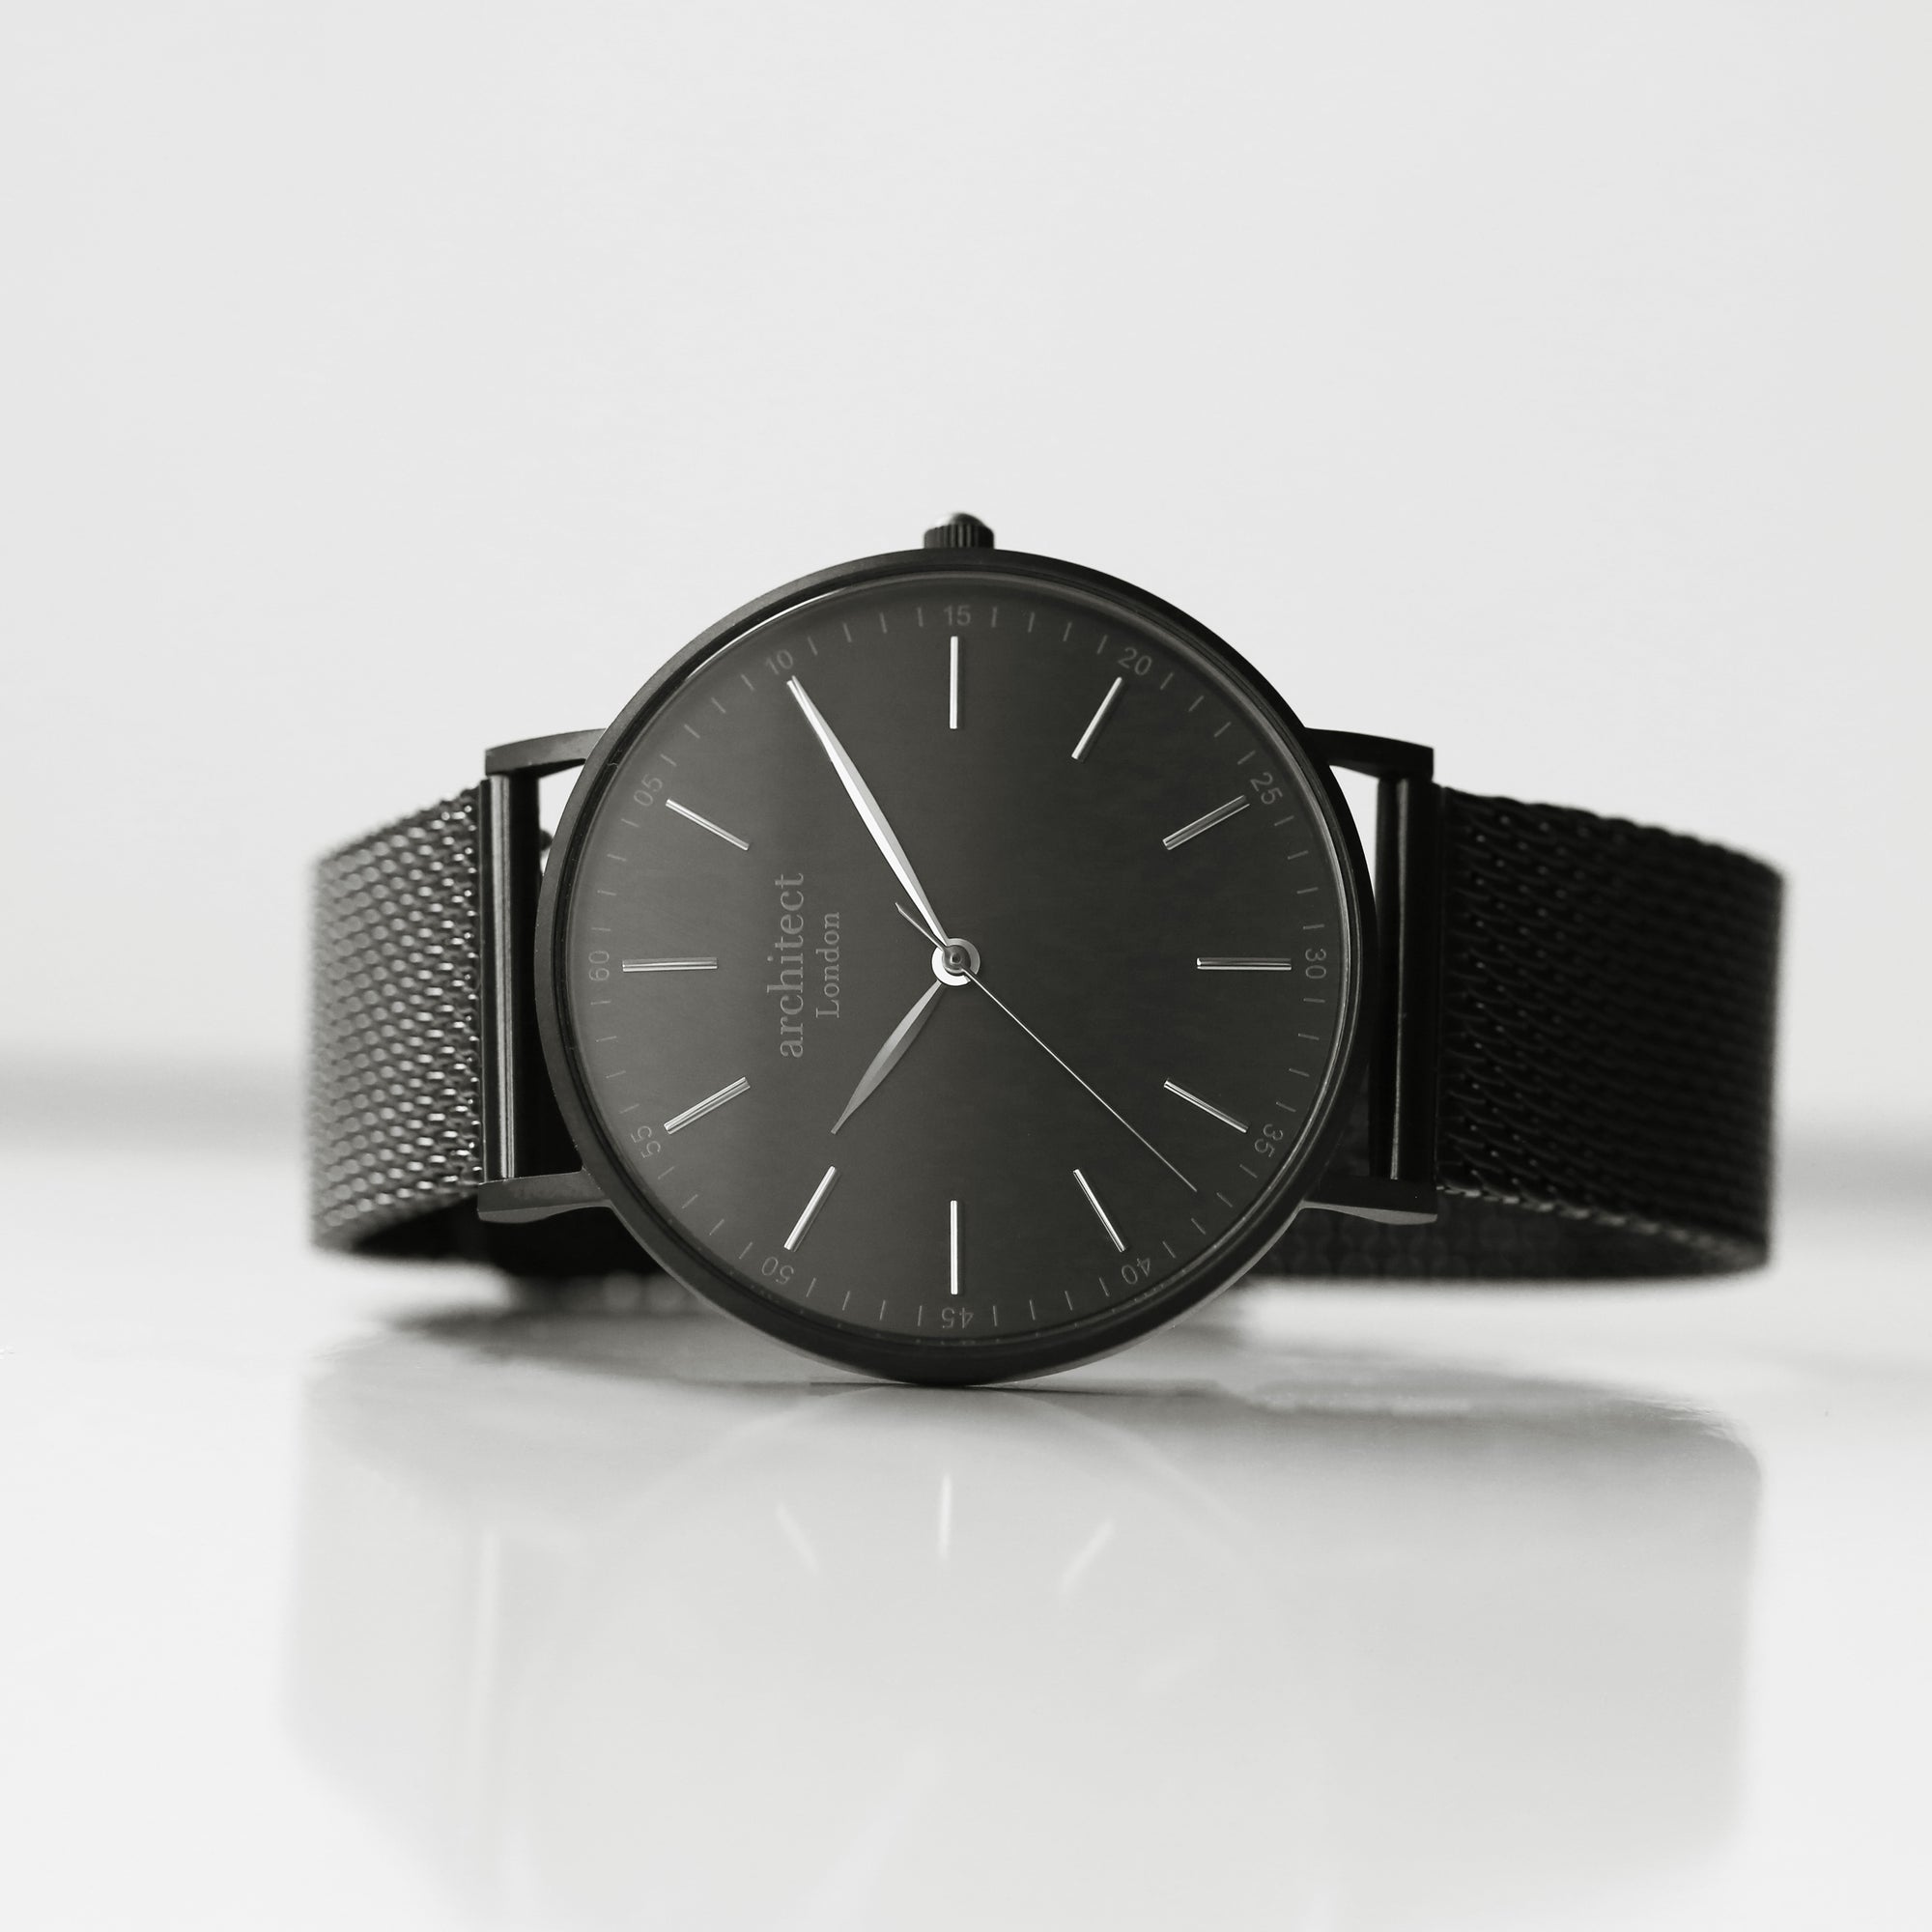 Image of a man's watch by The Architect Watch Company London. The watch has a black dial and a black stainless steel mesh strap. The rear of the watch can be engraved with a message in your own handwriting.